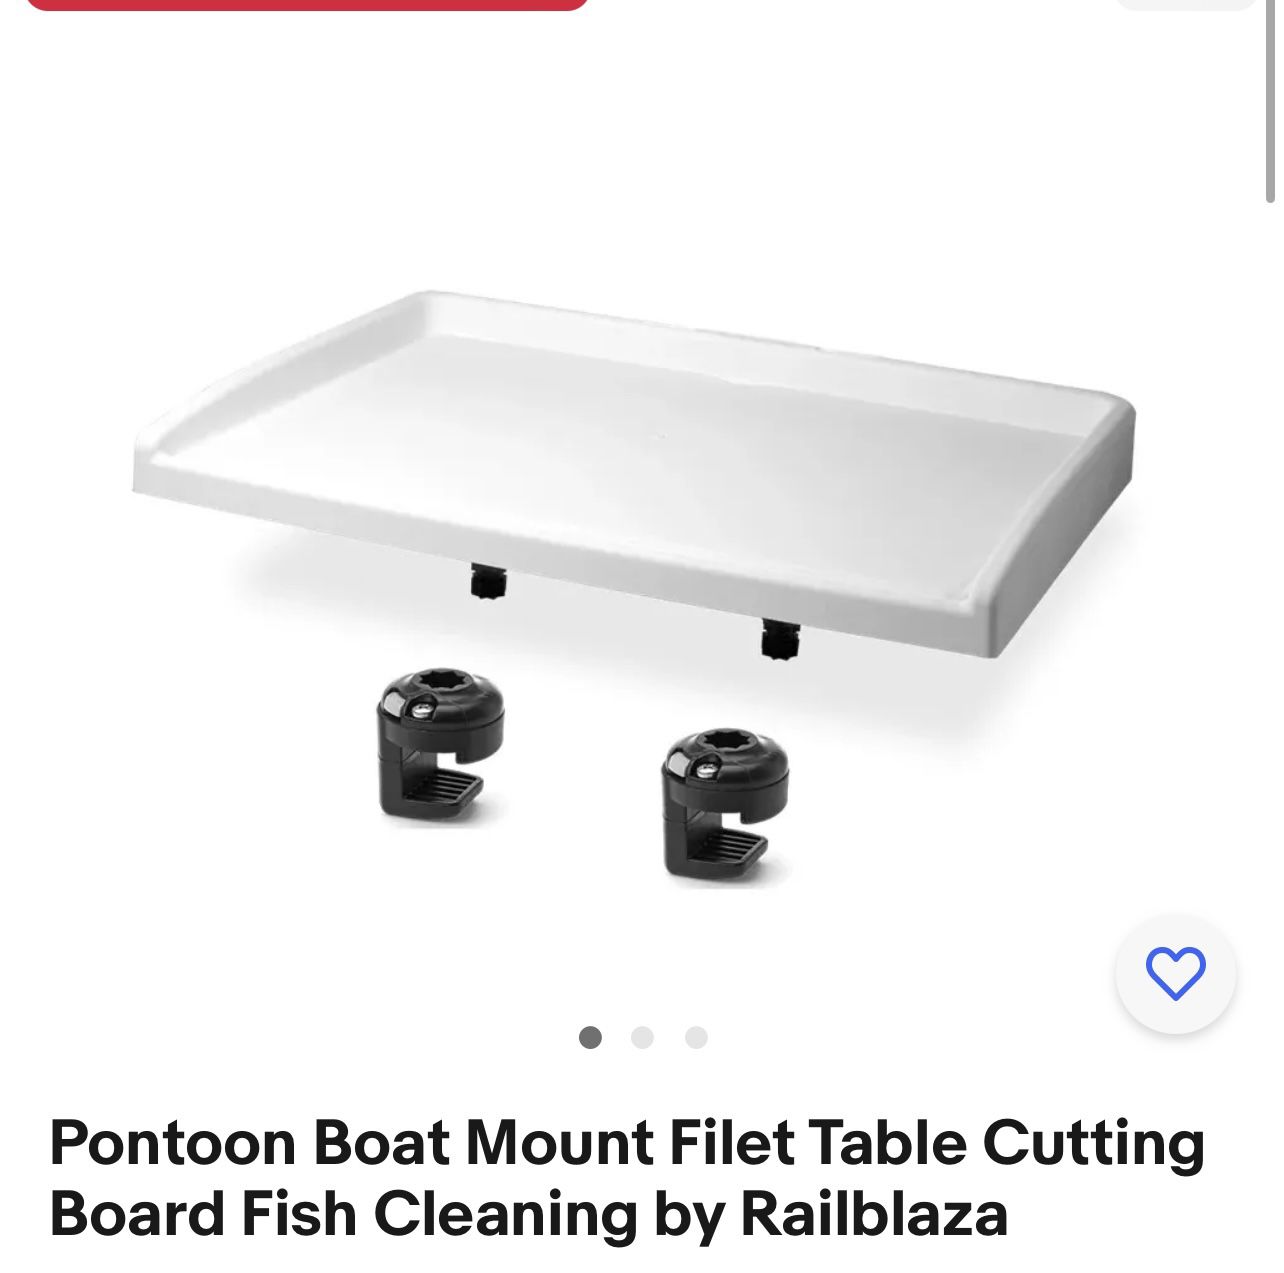 Pontoon Boat Mount Filet Table Cutting Board Fish Cleaning by Railblaza